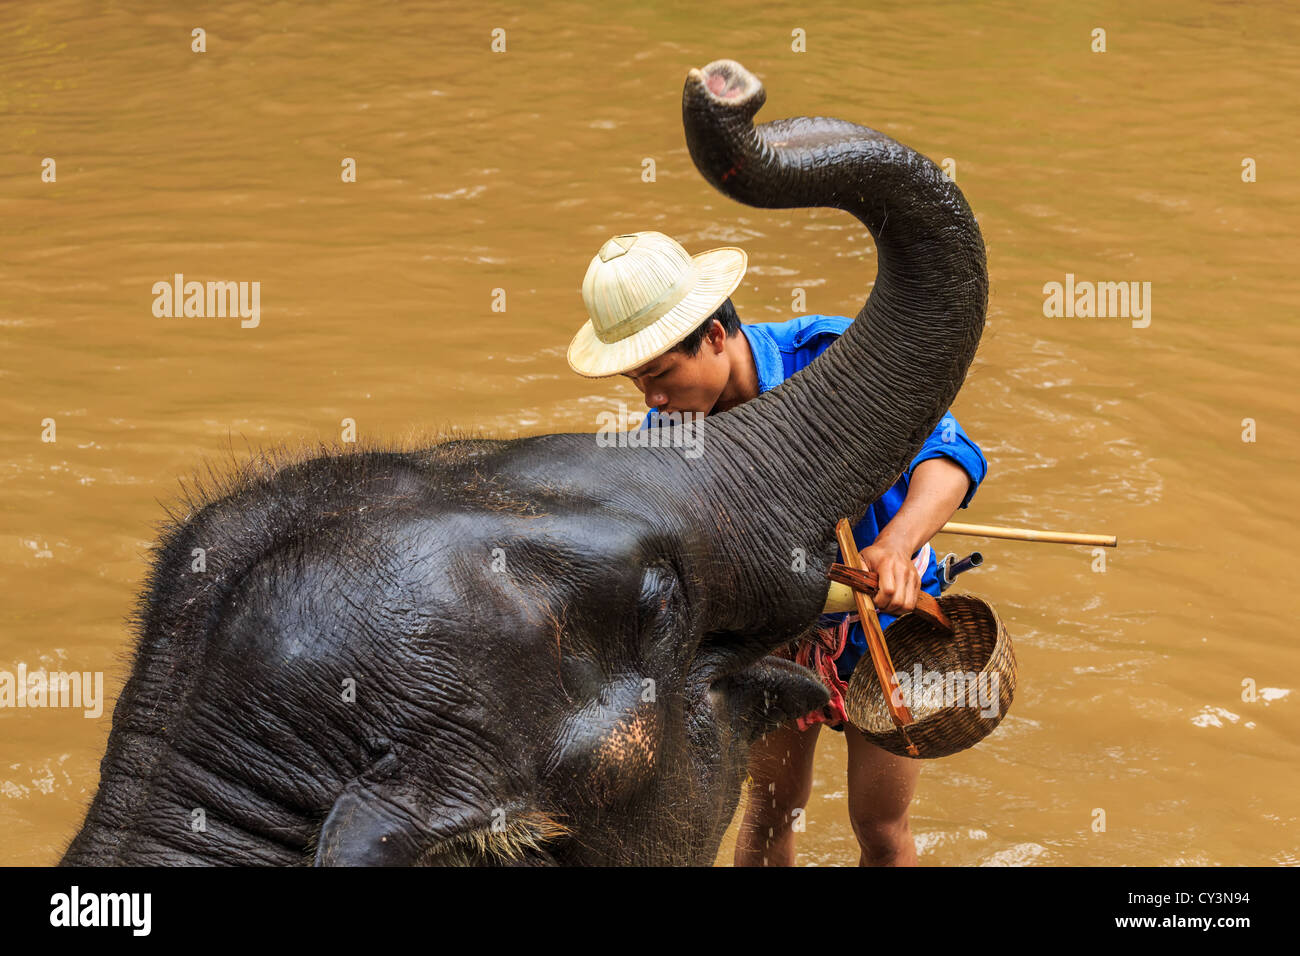 Mahout cleaning a elephant in a river, Chiang Mai, Thailand Stock Photo